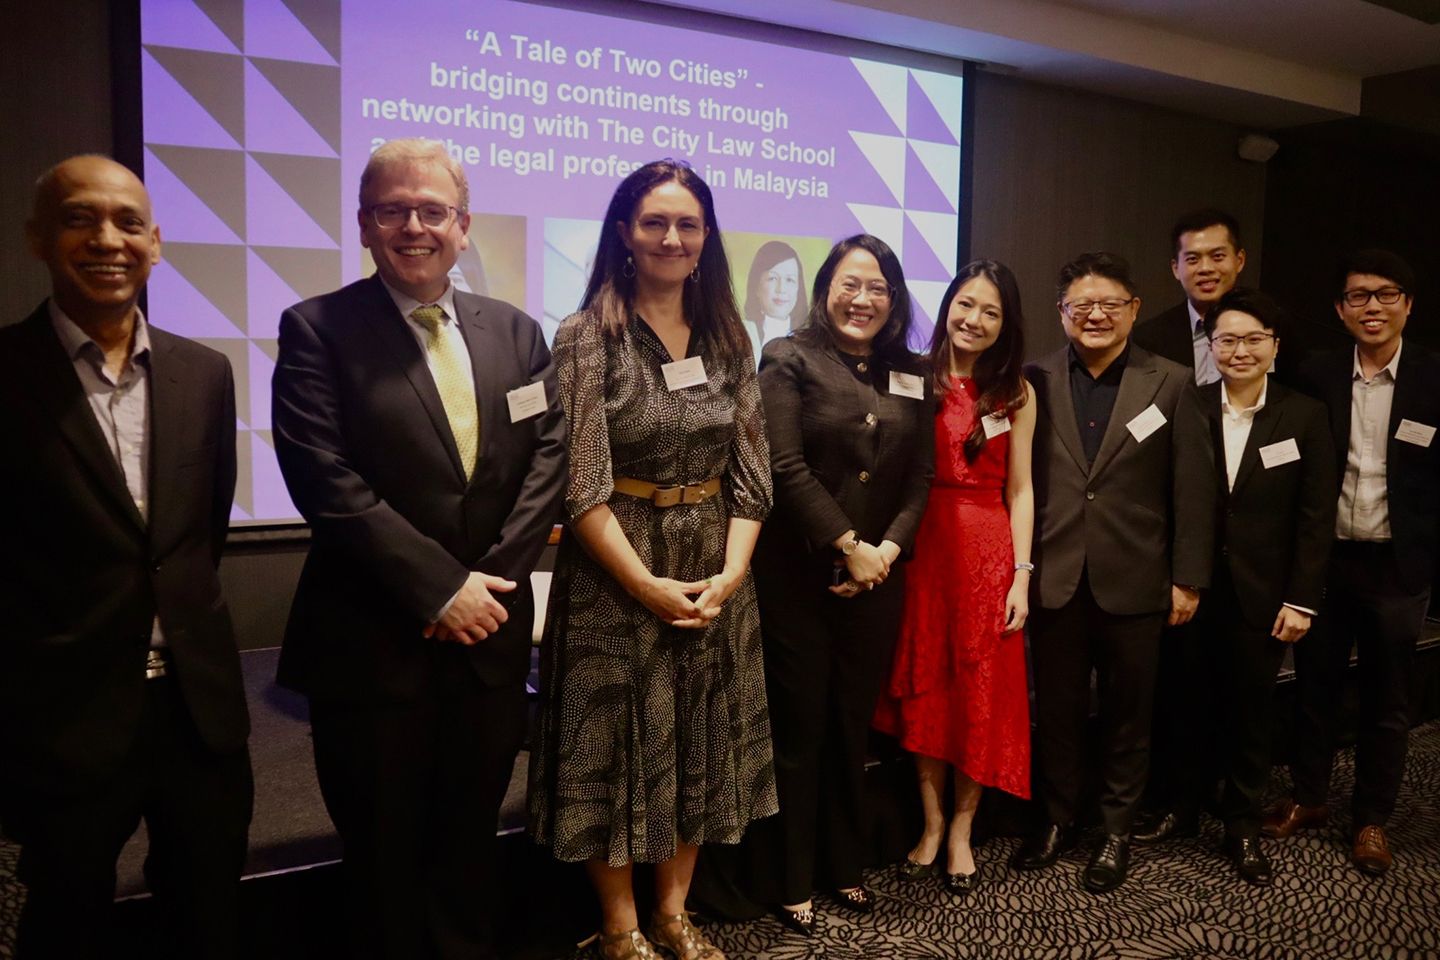 Post-event reception: (left to right): The Honourable Datuk Ravinthran a/l Paramaguru (Judge of the Court of Appeal), Professor Mark O’ Brien (Deputy Dean, CLS) , Ms Nikki Walsh (Associate Dean, CLS), Ms Mary Ann Ooi Suan Kim (CLS alumna, BVS, 2007) and Ms Crystal Wong Wai Chin and Mr Andrew Chiew Ean Vooi (Partners at Lee Hishammuddin Allen & Gledhill) with members of their team, all CLS alumni.